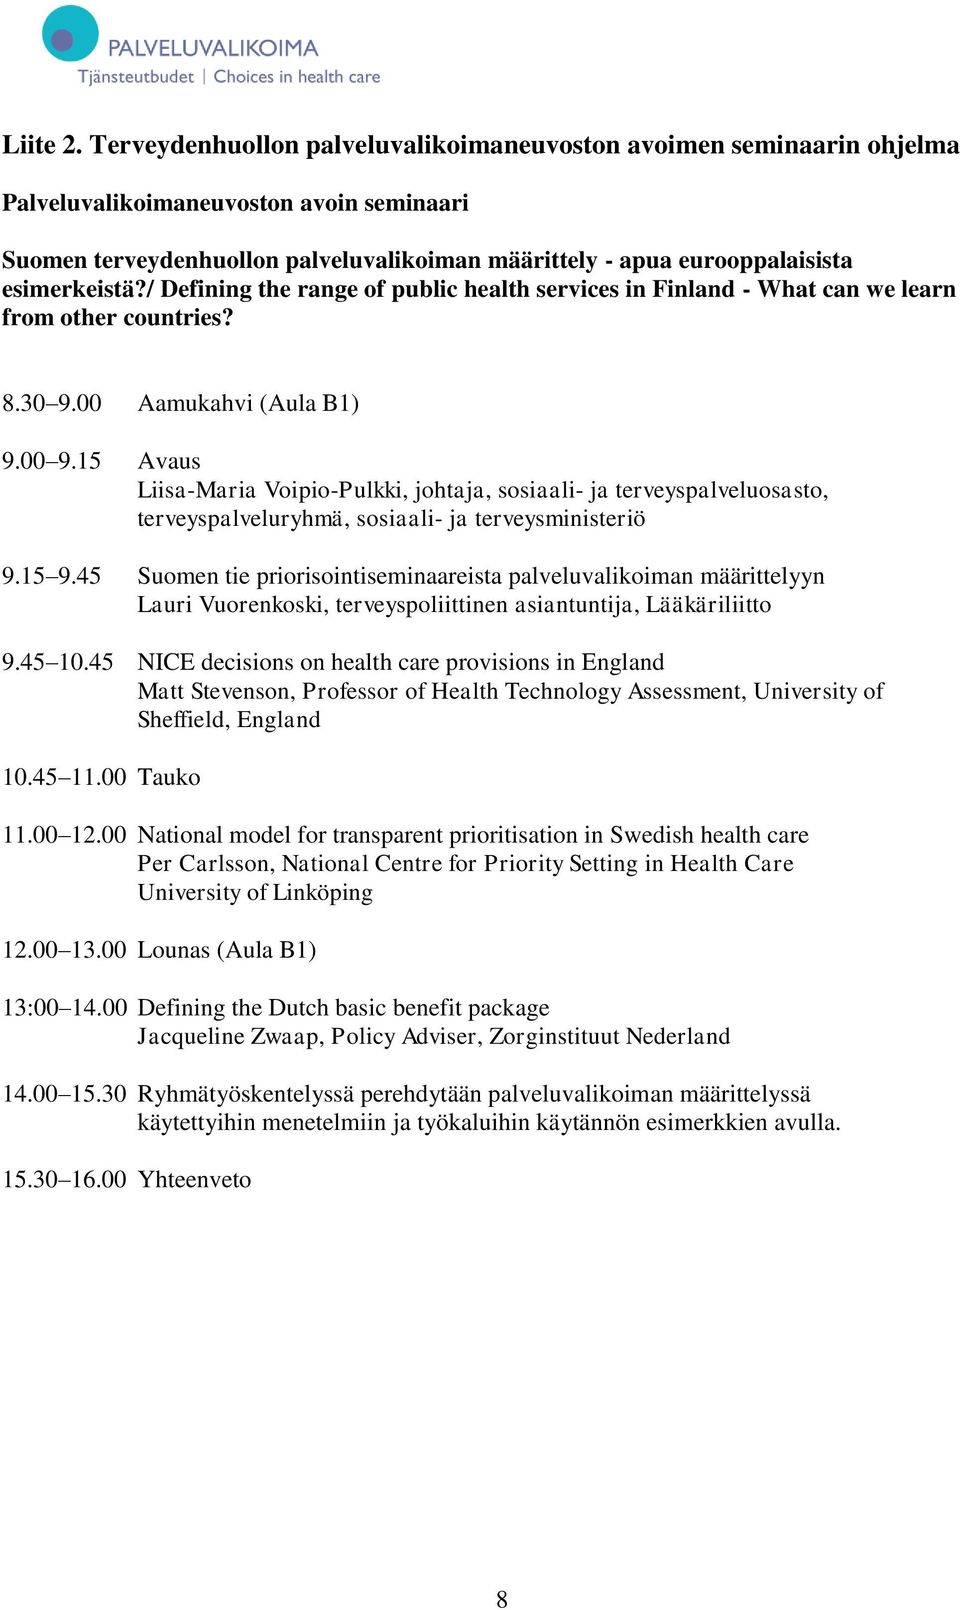 esimerkeistä?/ Defining the range of public health services in Finland - What can we learn from other countries? 8.30 9.00 Aamukahvi (Aula B1) 9.00 9.